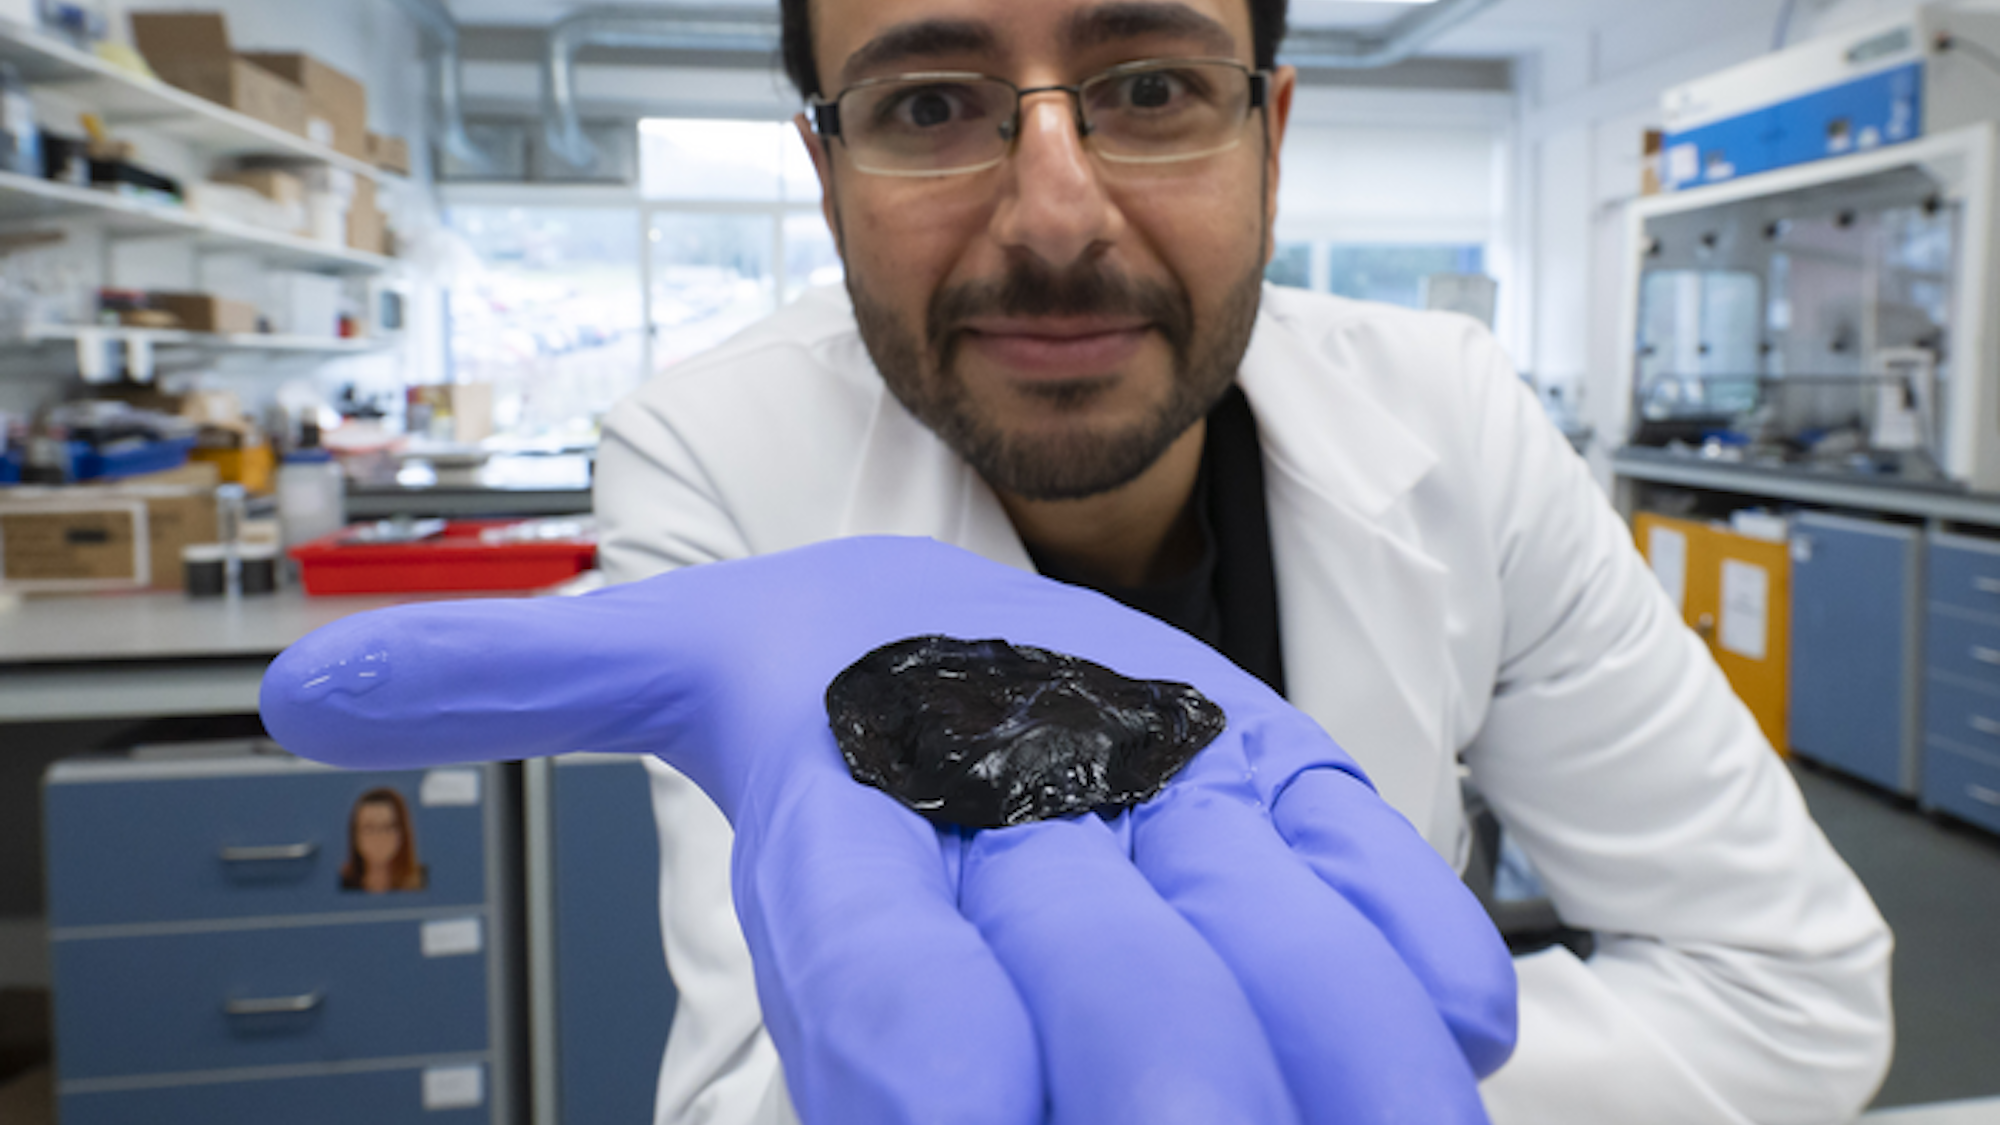 Research student holding graphene seaweed hydrogel in gloved hand